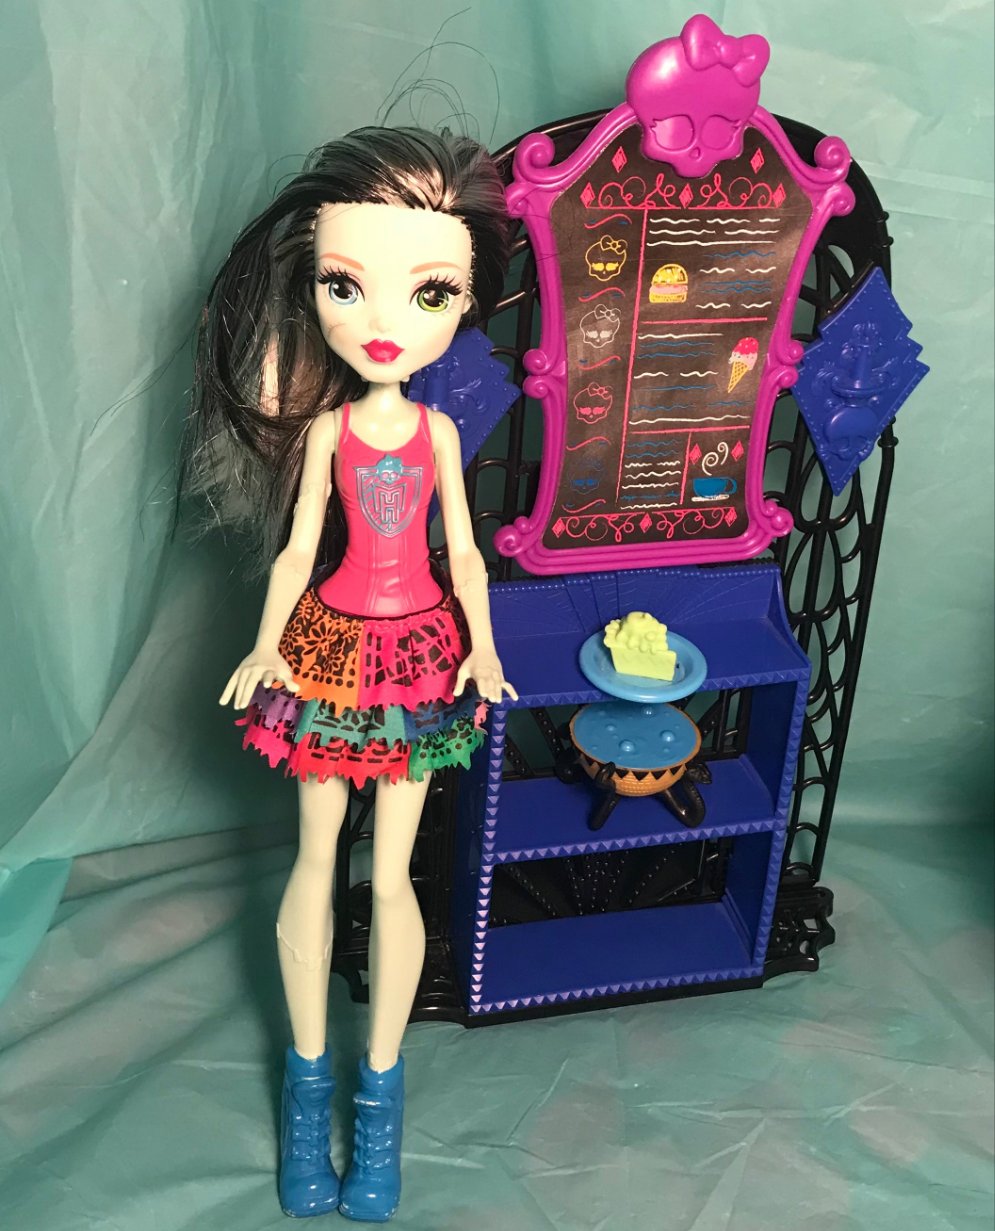 2015 Mattel Monster High Frankie Stein Doll with Cream and Sugar Cafe Stand